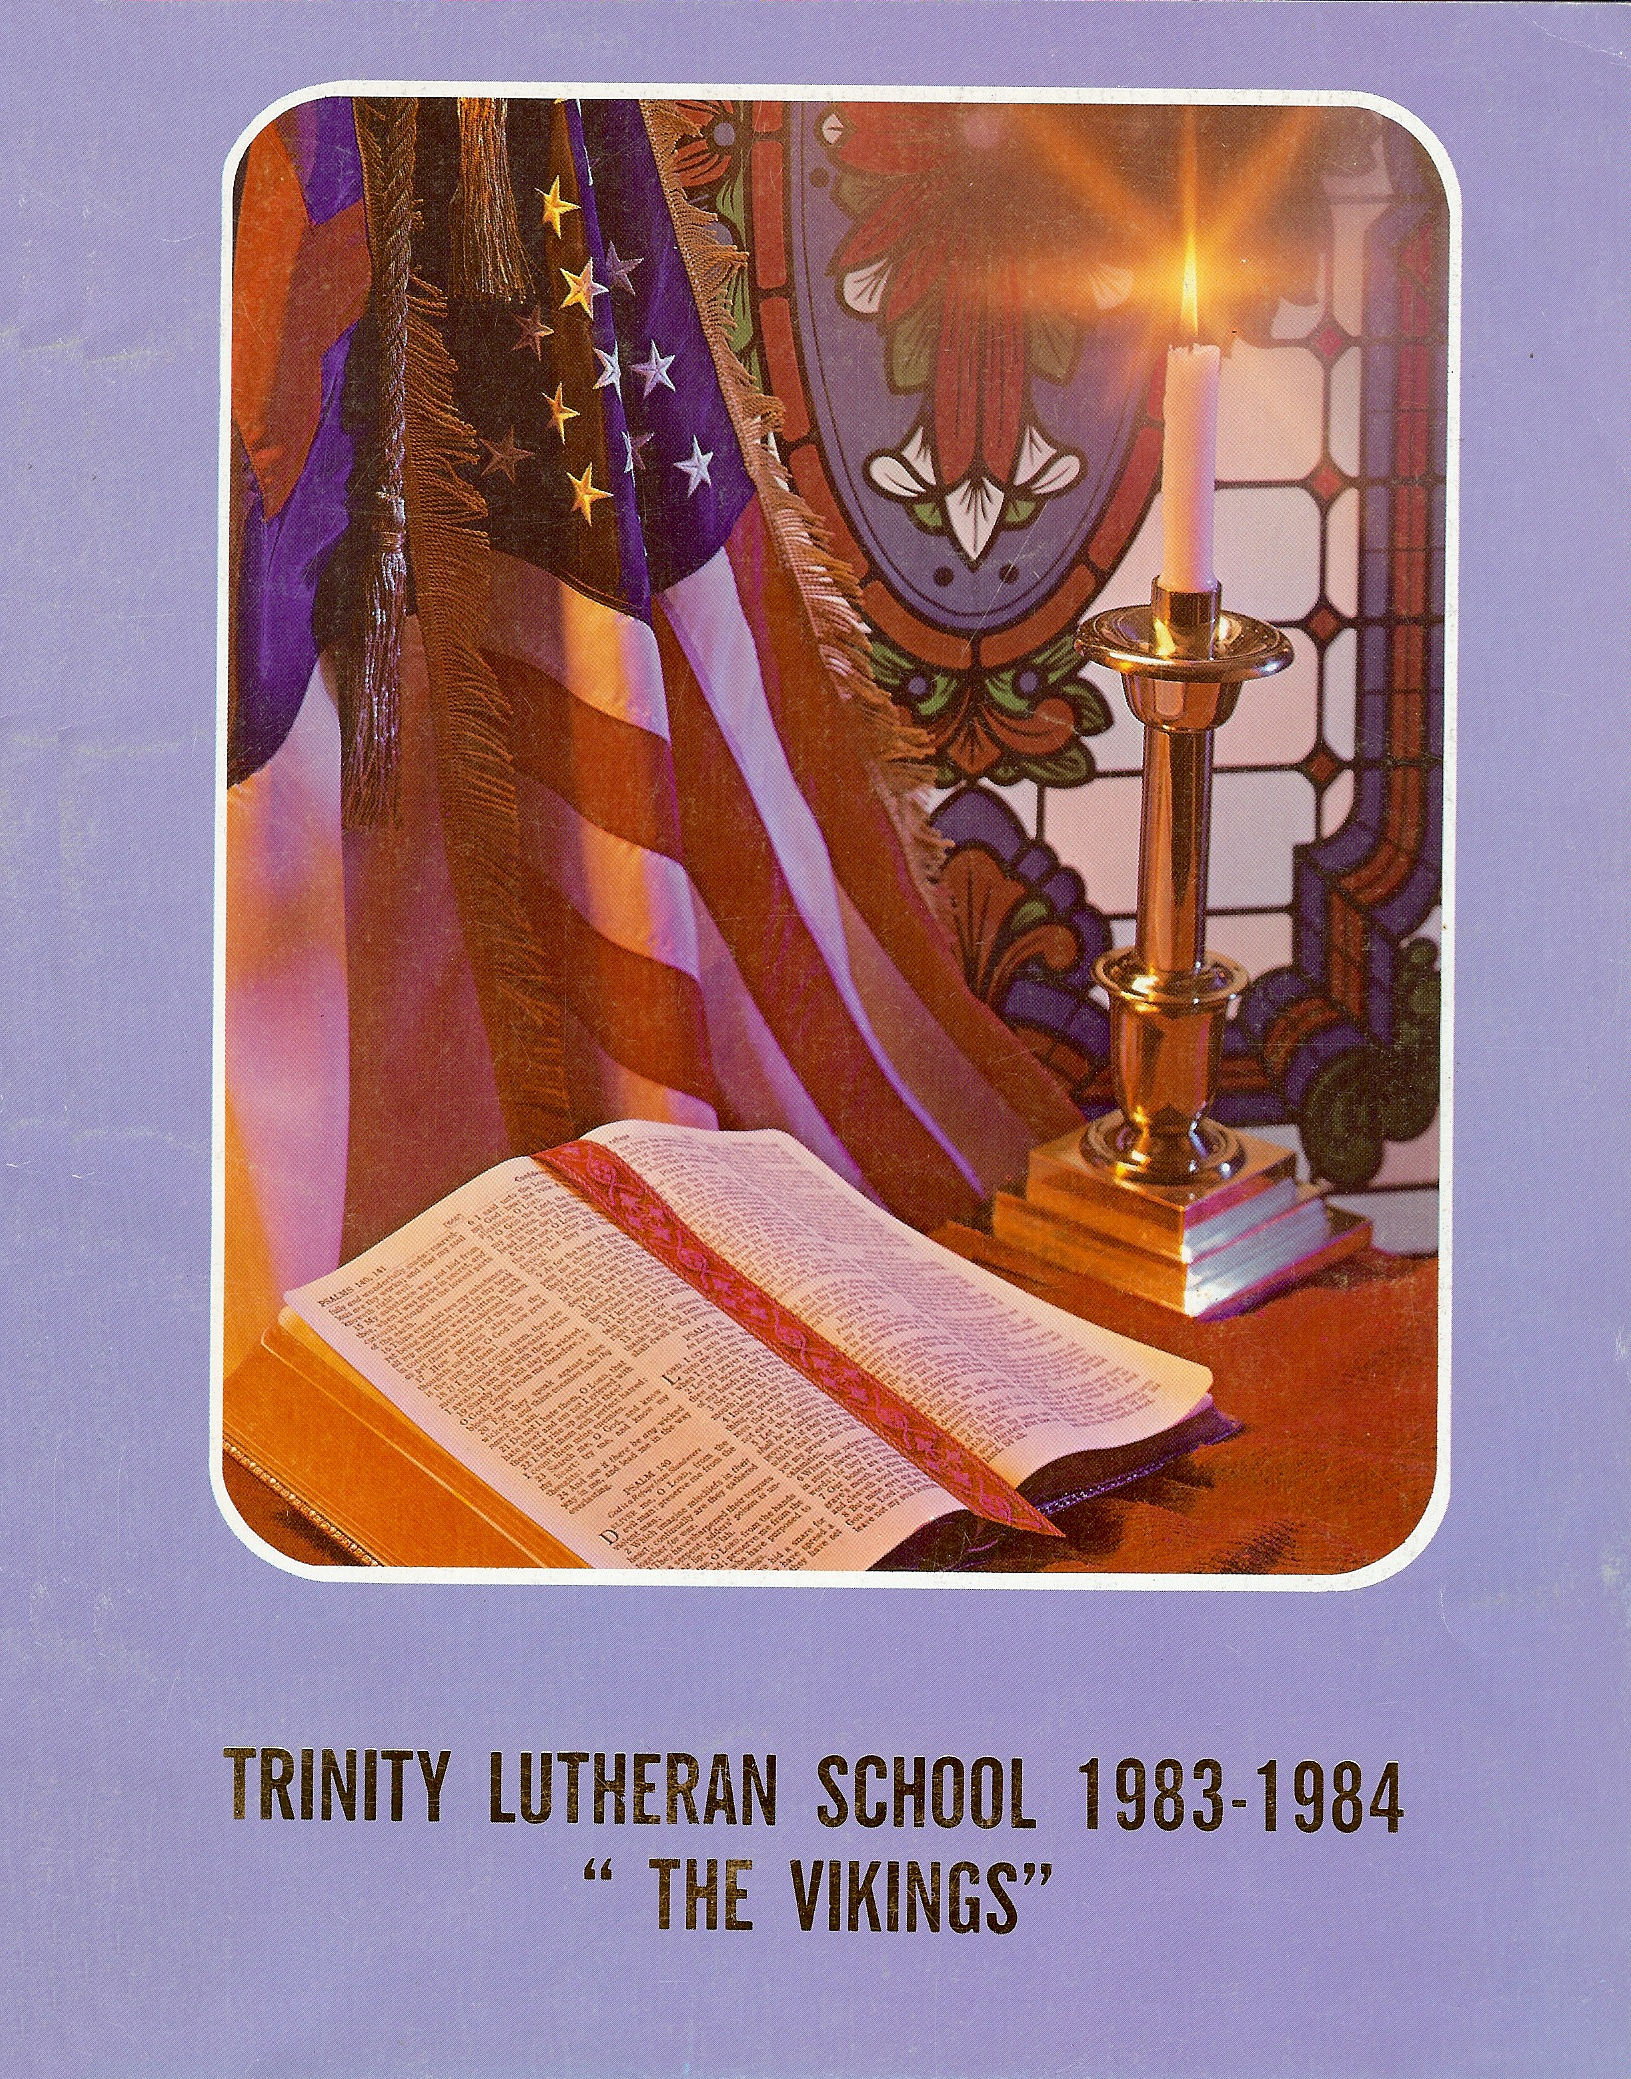 83-84 Yearbook Cover